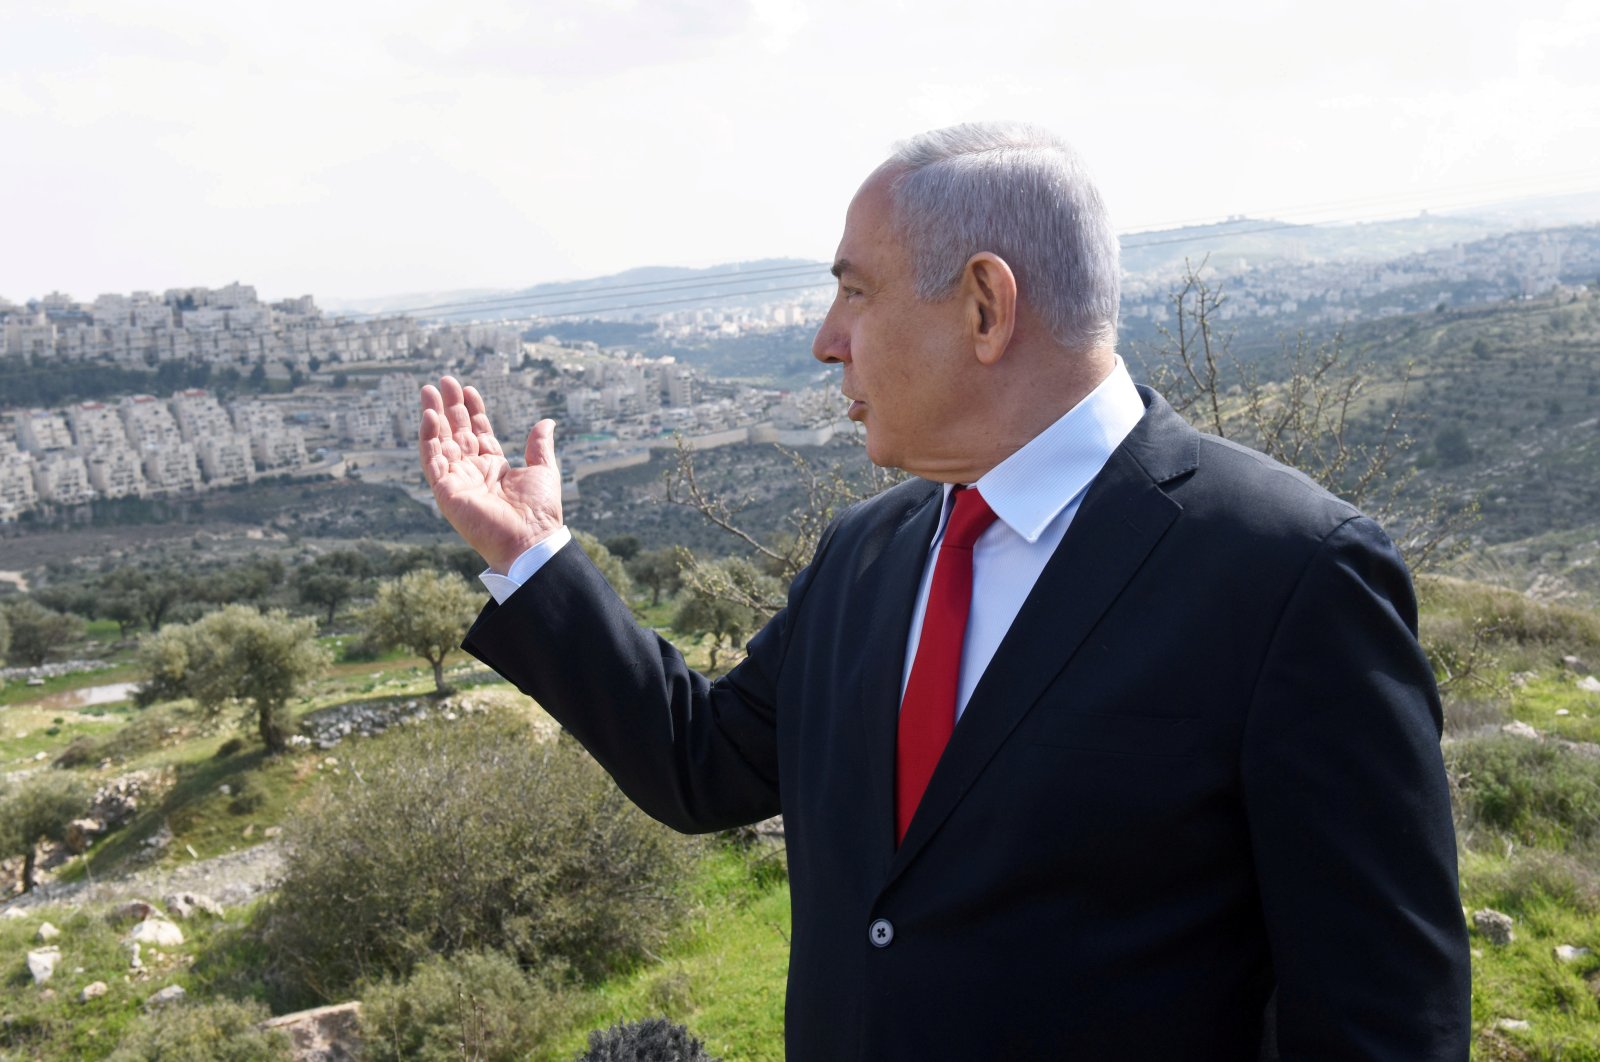 Israeli Prime Minister Benjamin Netanyahu delivers a statement overlooking the Israeli settlement of Har Homa, occupied West Bank, Palestine, Feb. 20, 2020. (Reuters Photo)